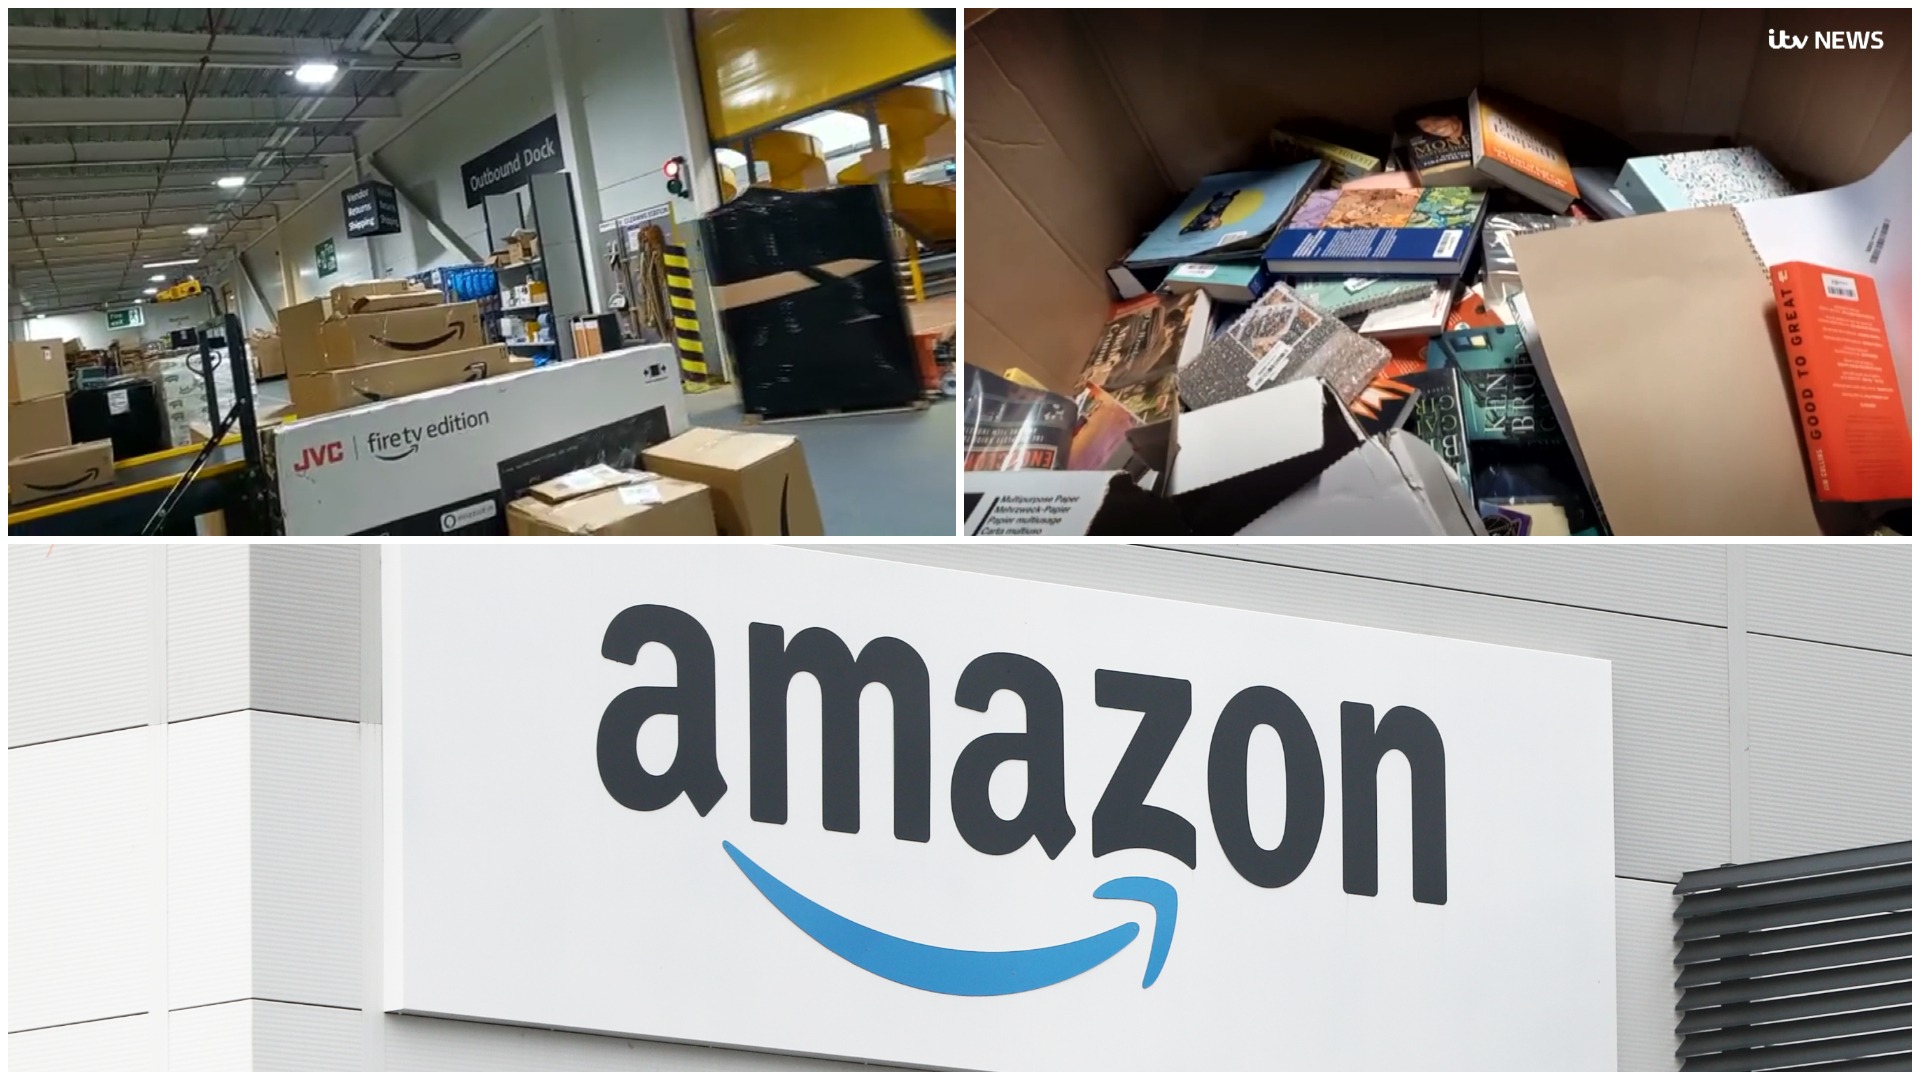 Exclusive: Watch footage showing the 'destruction zone' in Amazon's Dunfermline warehouse where millions of unsold items are destroyed 